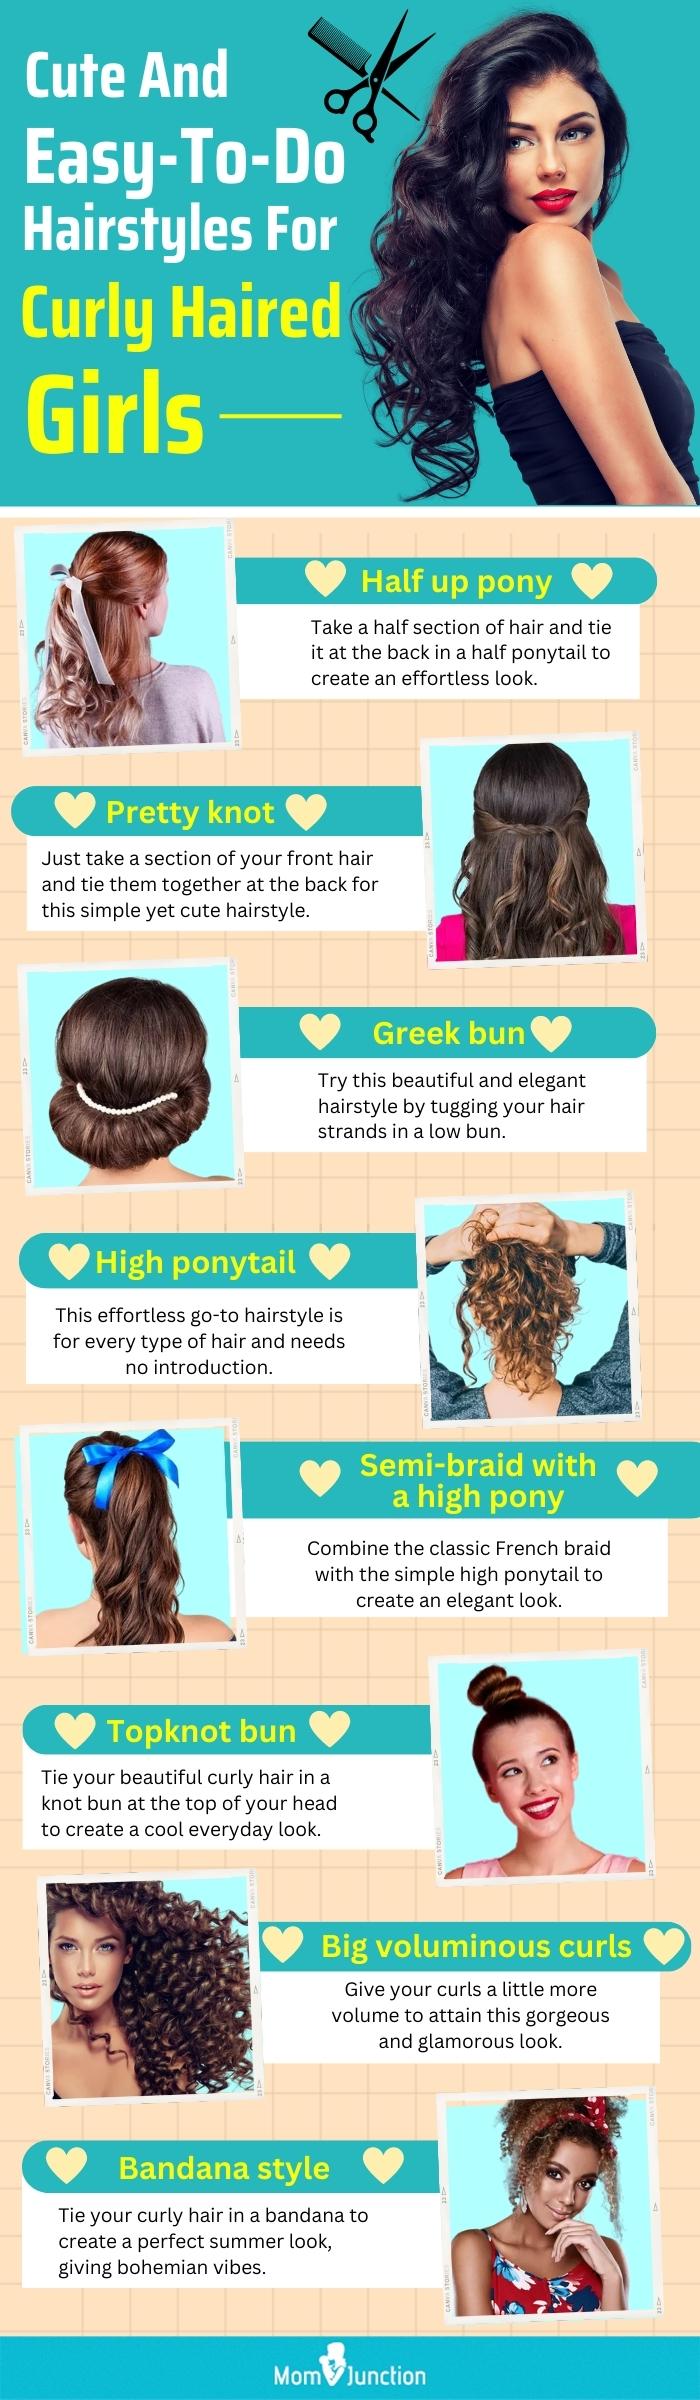 13 Cute Summer Hairstyles for 2016 | SELF